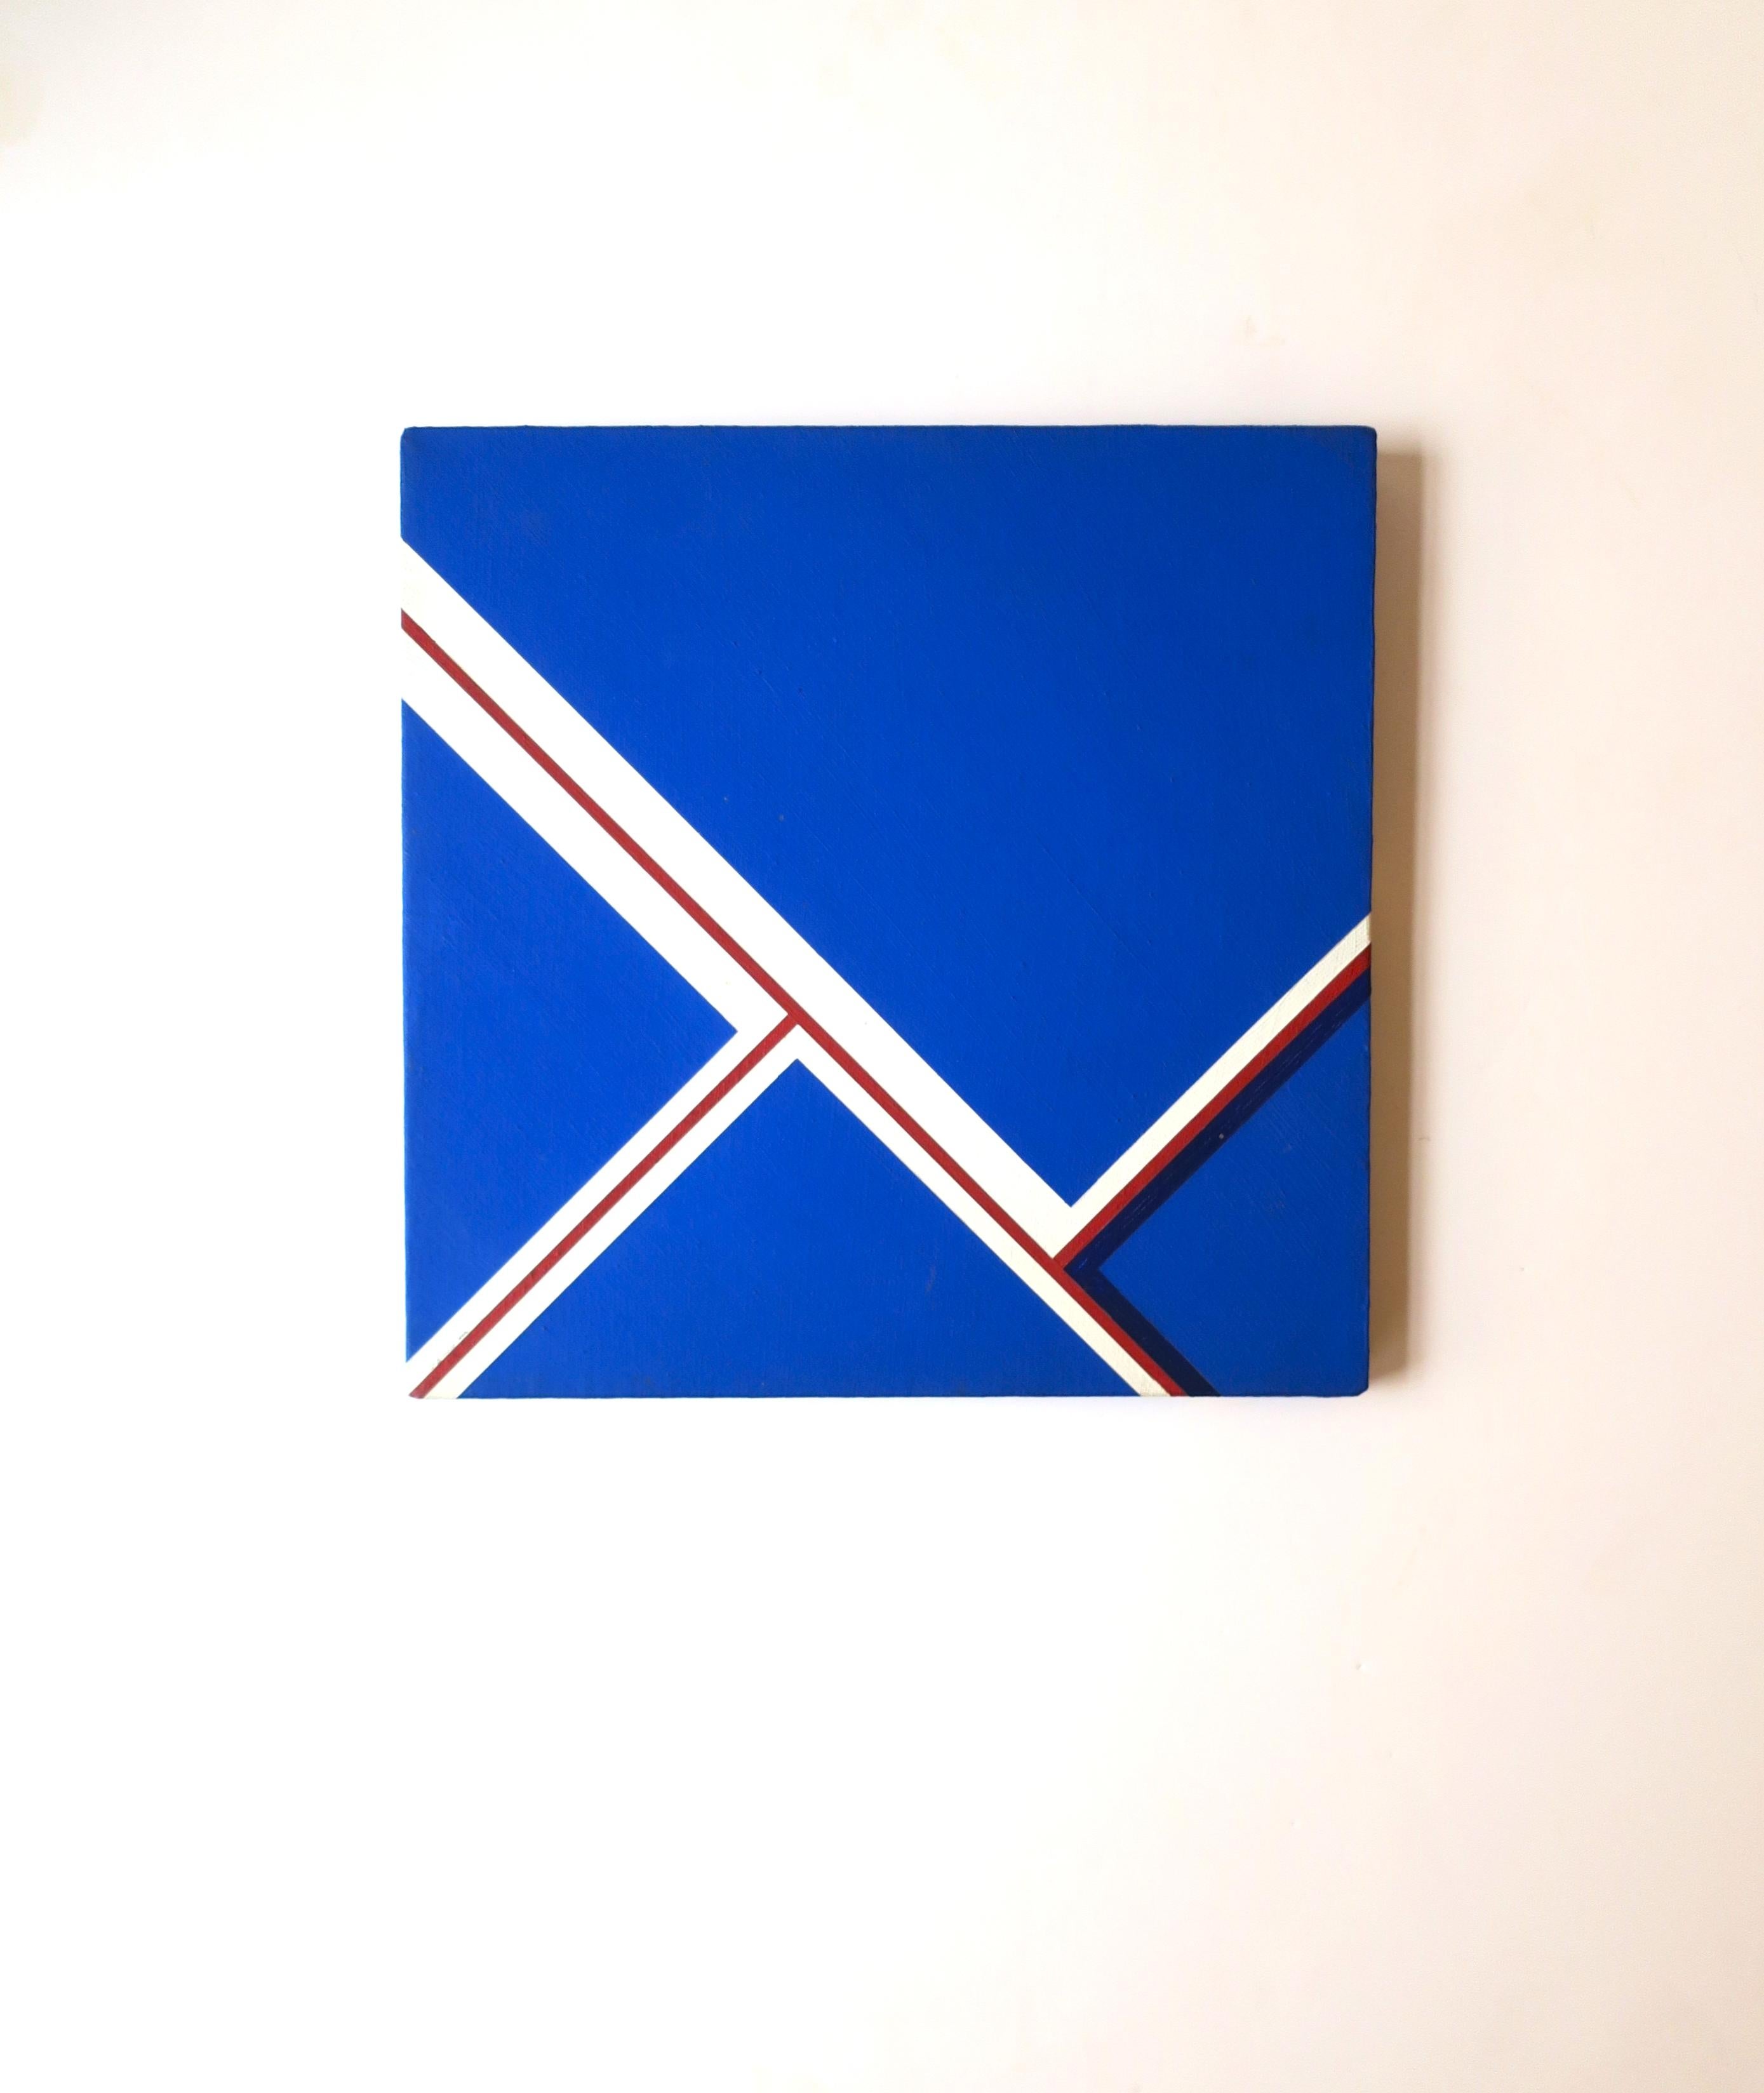 A Margot Lovejoy abstract artwork painting on canvas from the estate of Margot Lovejoy, New York, New York. Painting in on a hand-stretched canvas, as shown. Paint colors include cobalt blue (similar to Yves Klein Blue), white/off-white, red